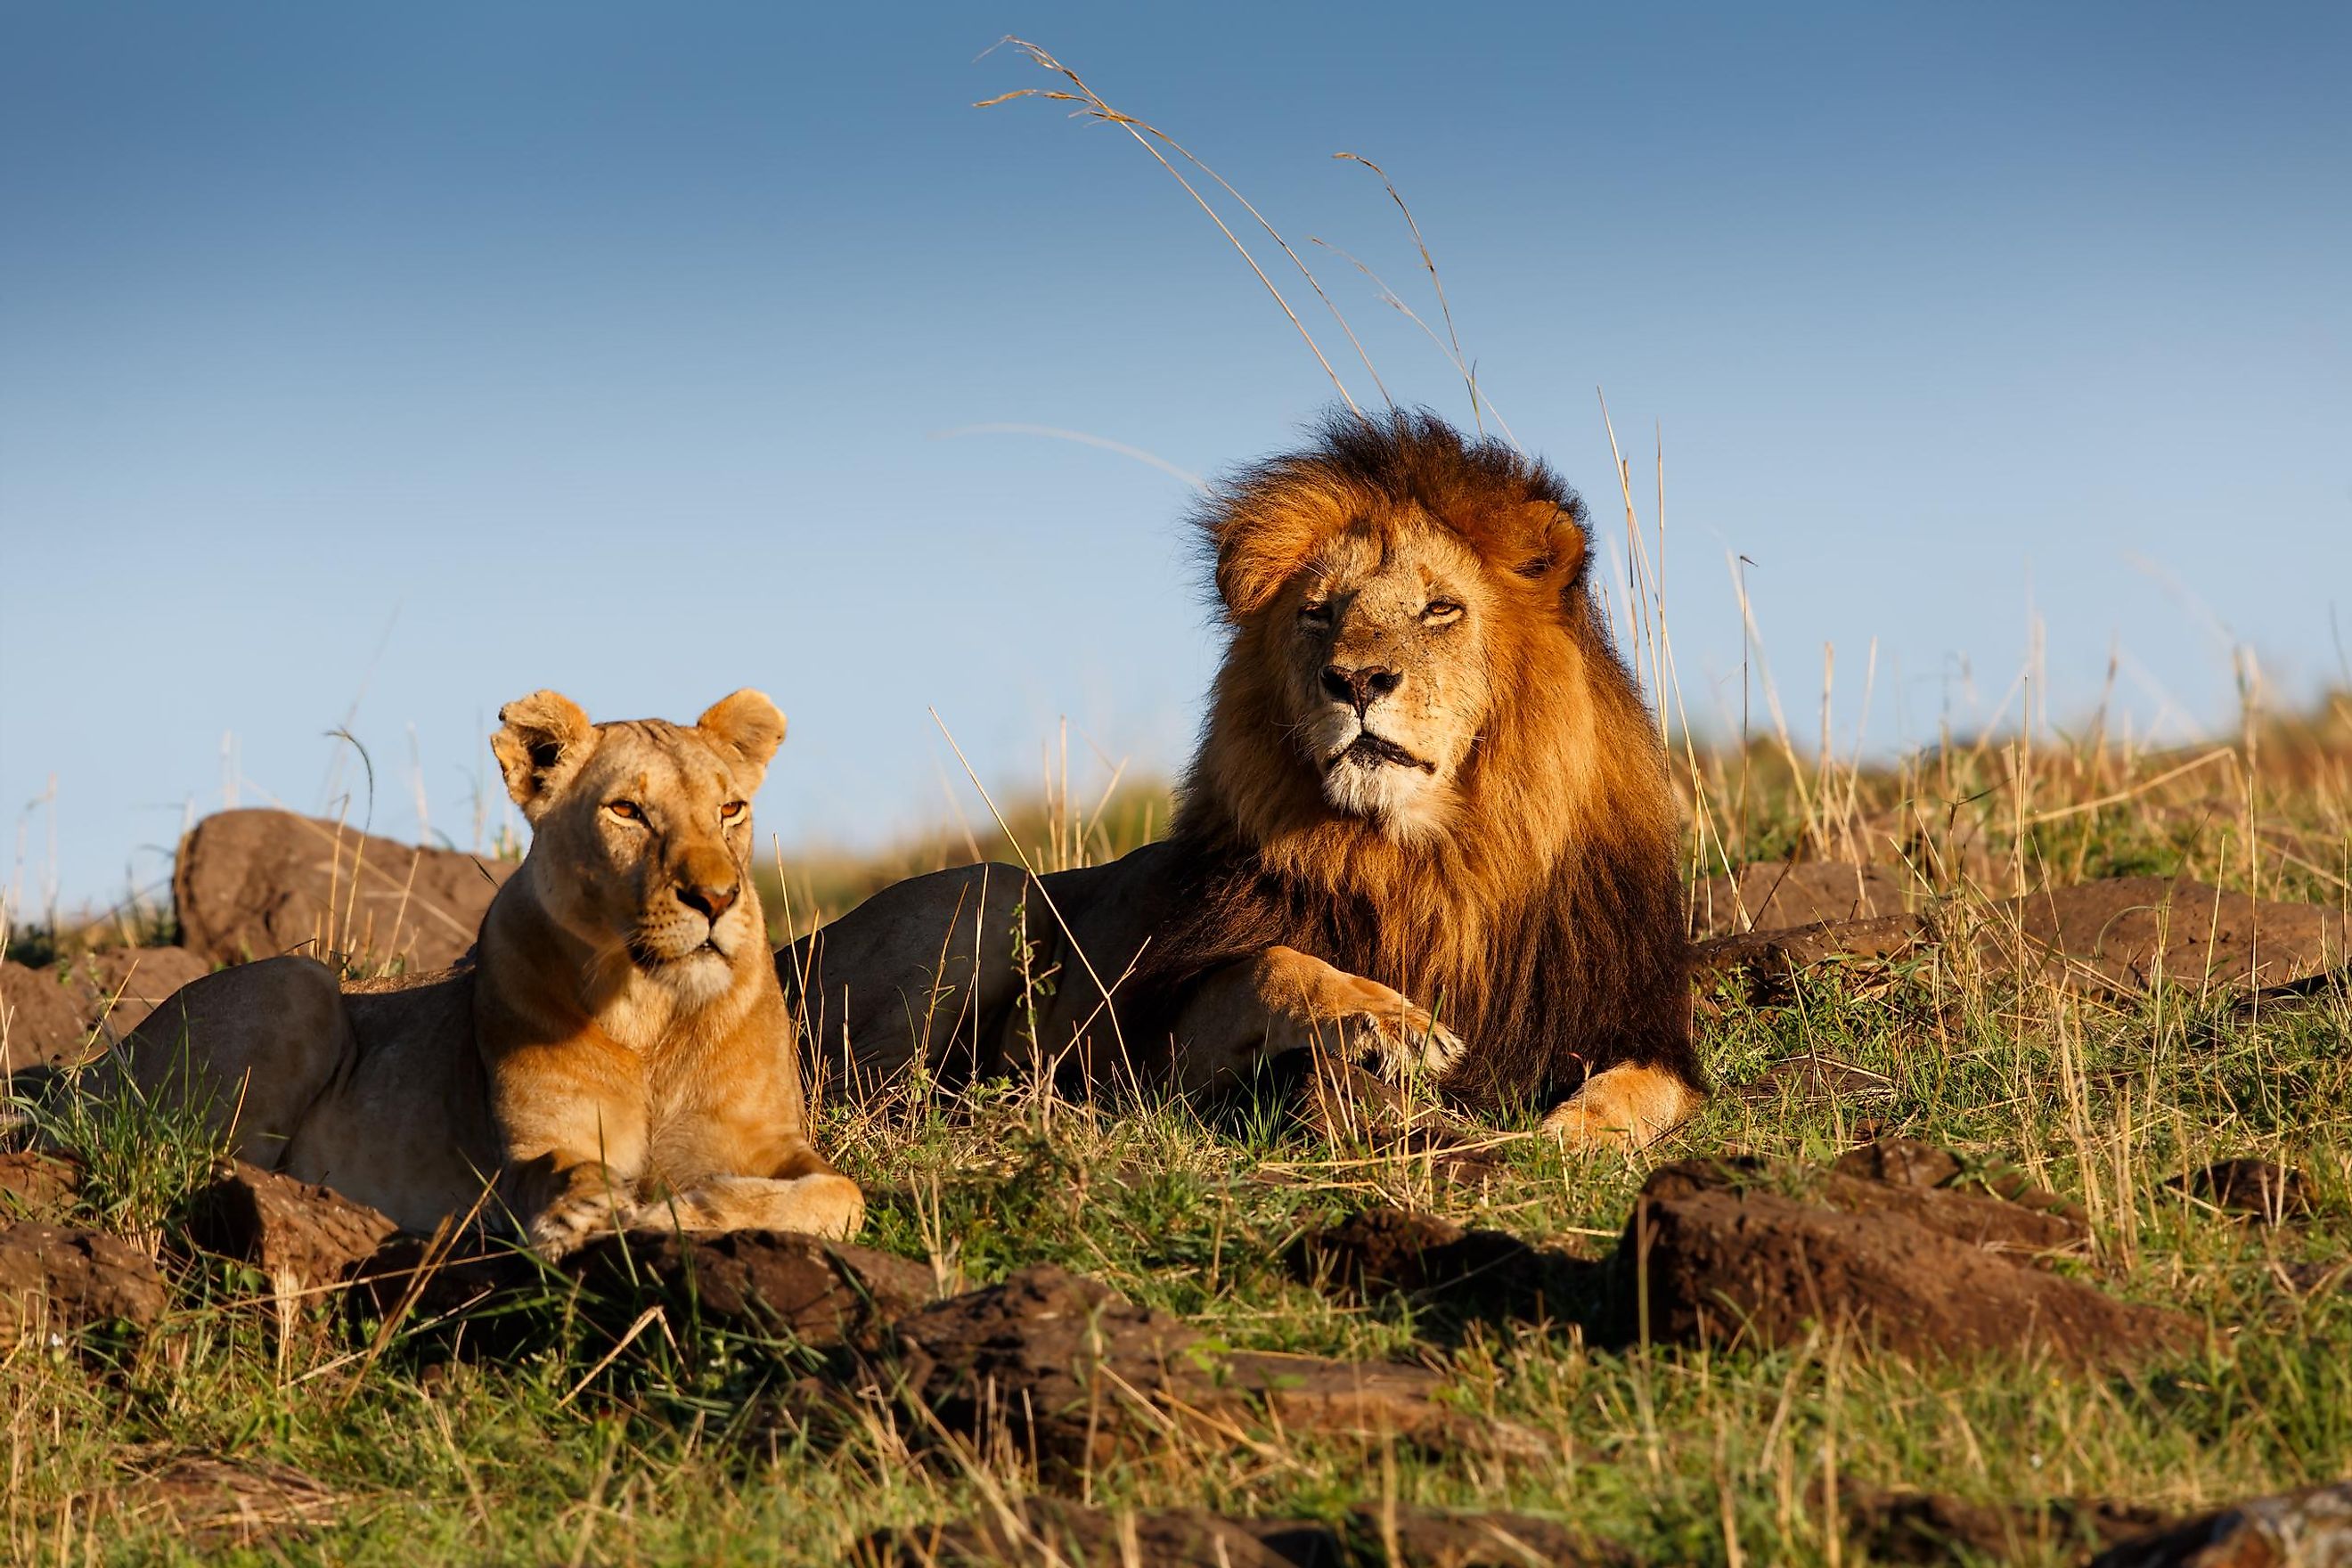 What Are The Differences Between Asiatic Lions And African Lions